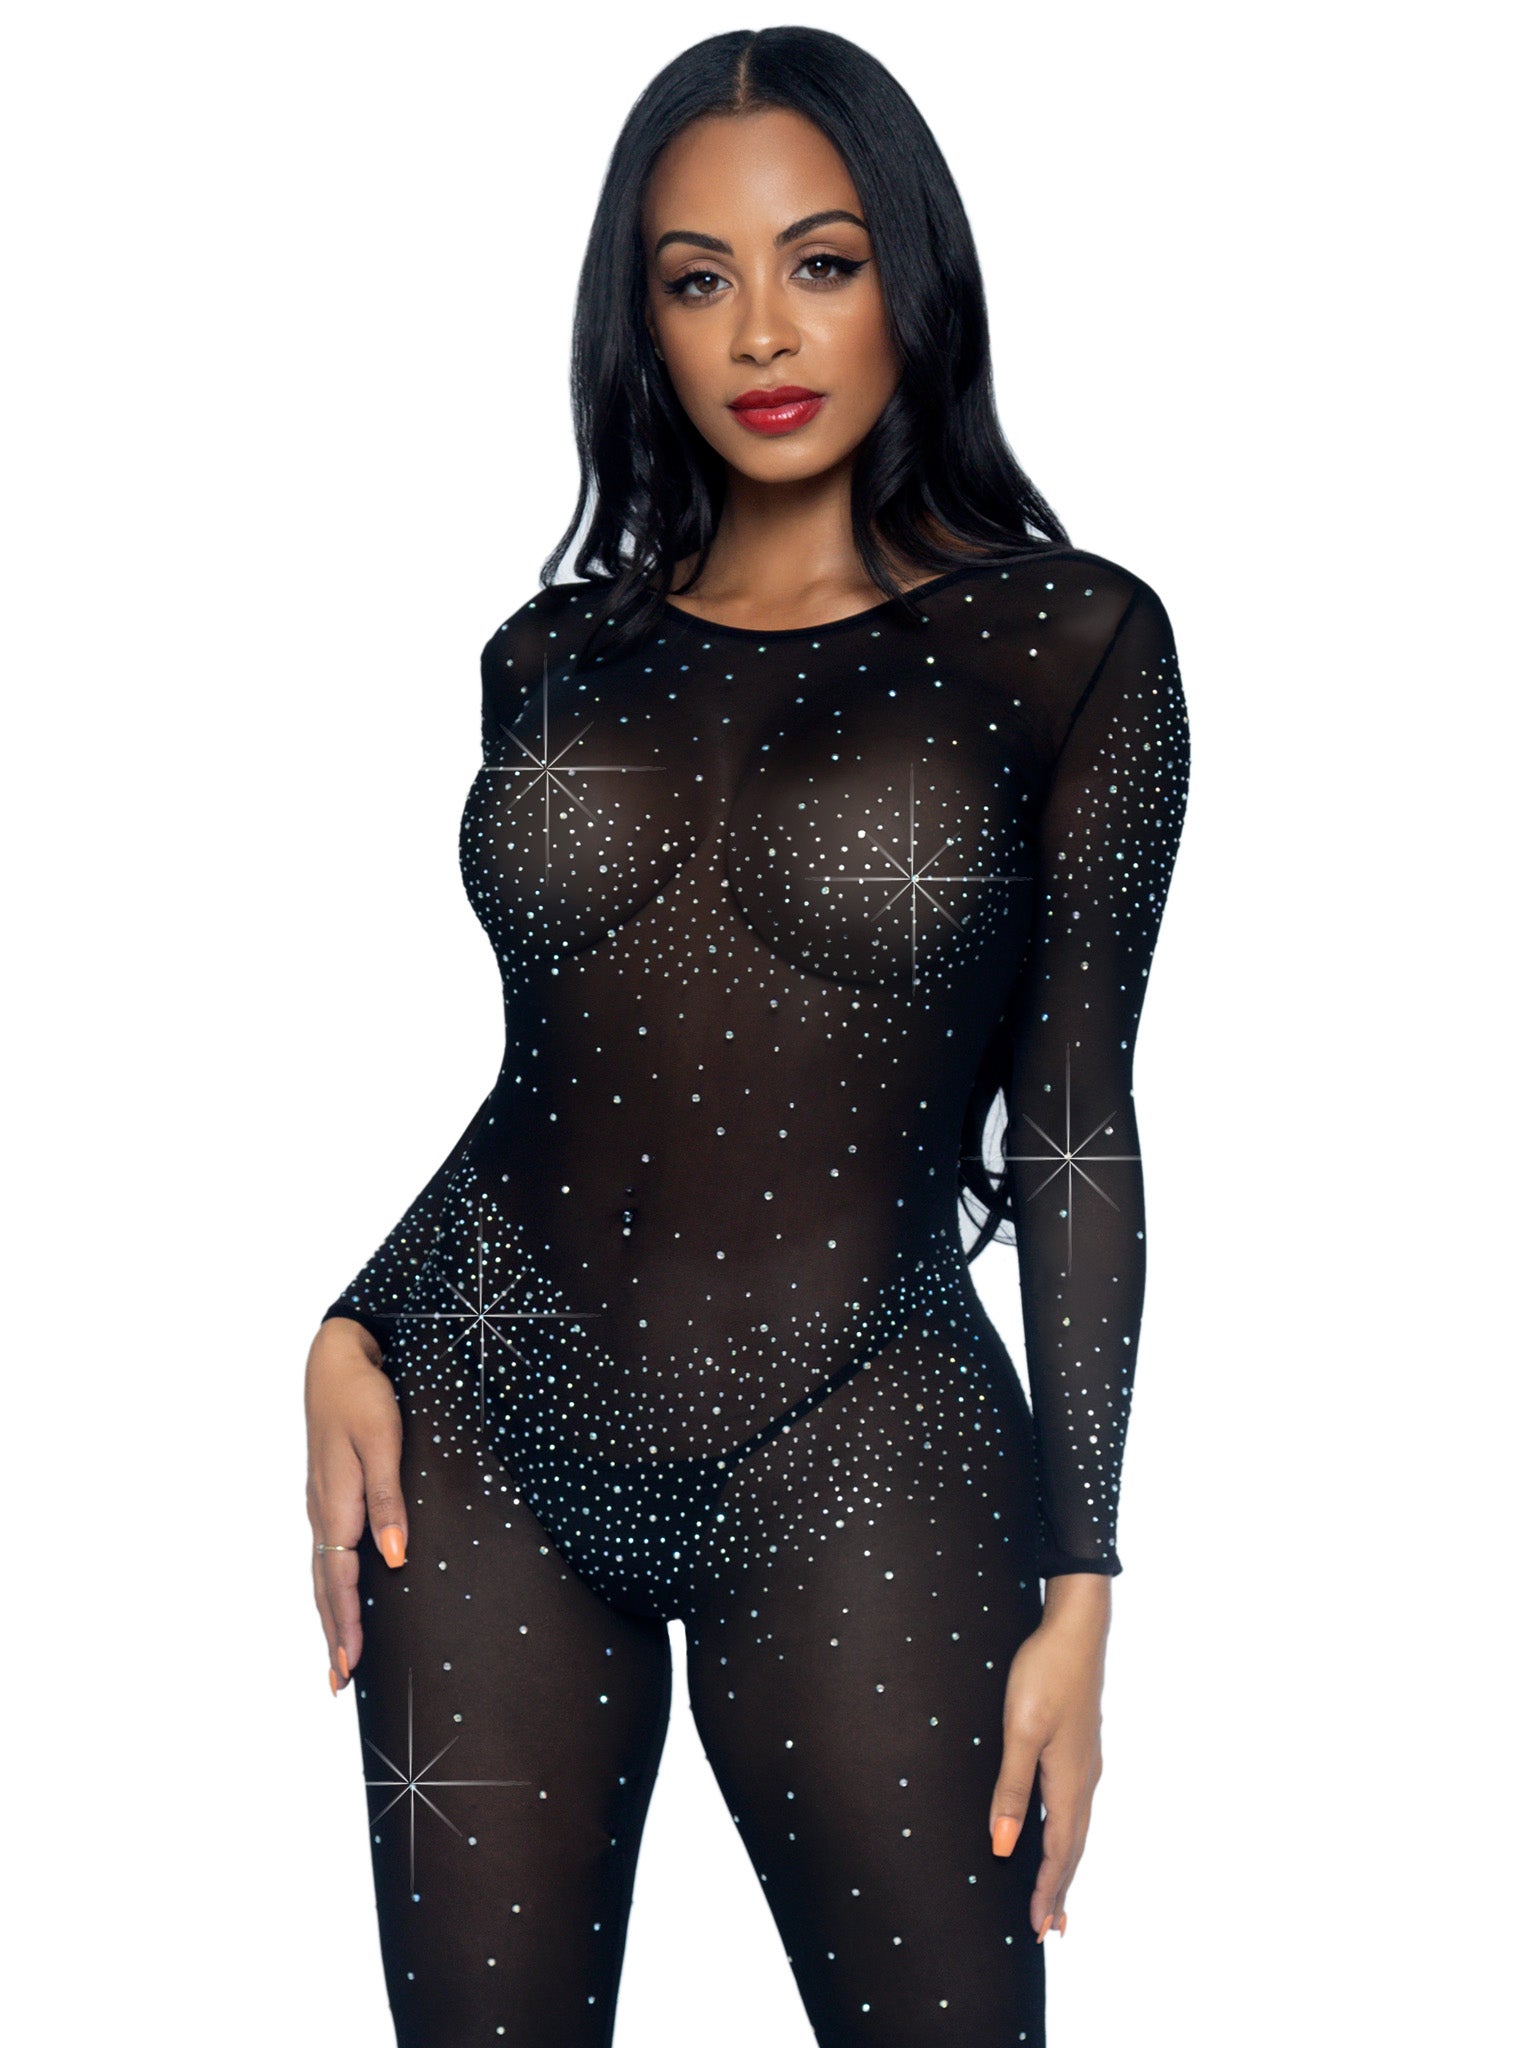 Just Dropped: Sheer Mesh Catsuits. Be your boldest all year long